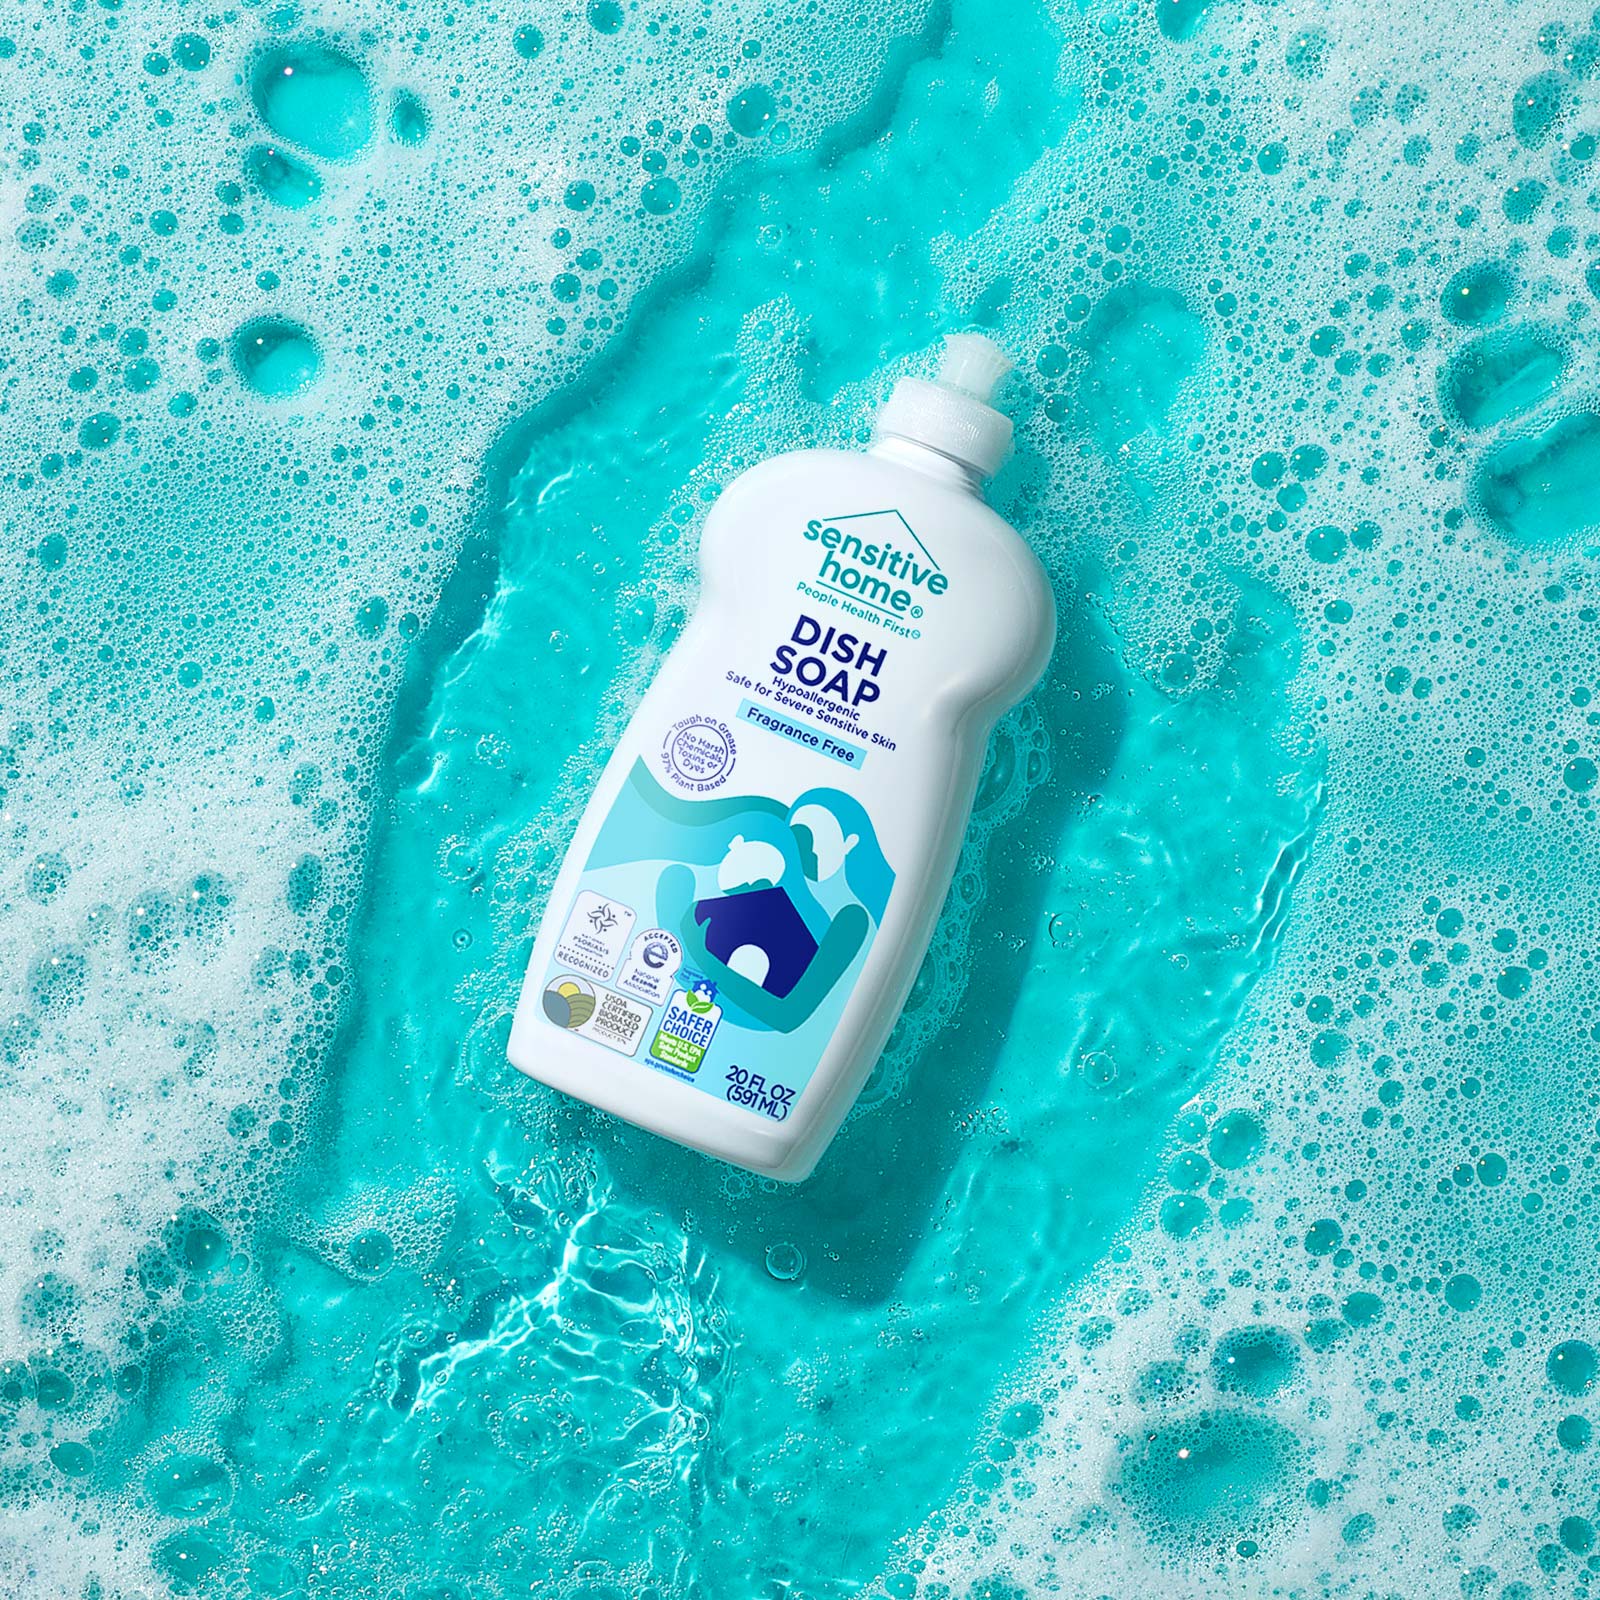 A bottle of Sensitive Home Laundry Detergent - Free & Clear floating in soapy water over a light blue surface.